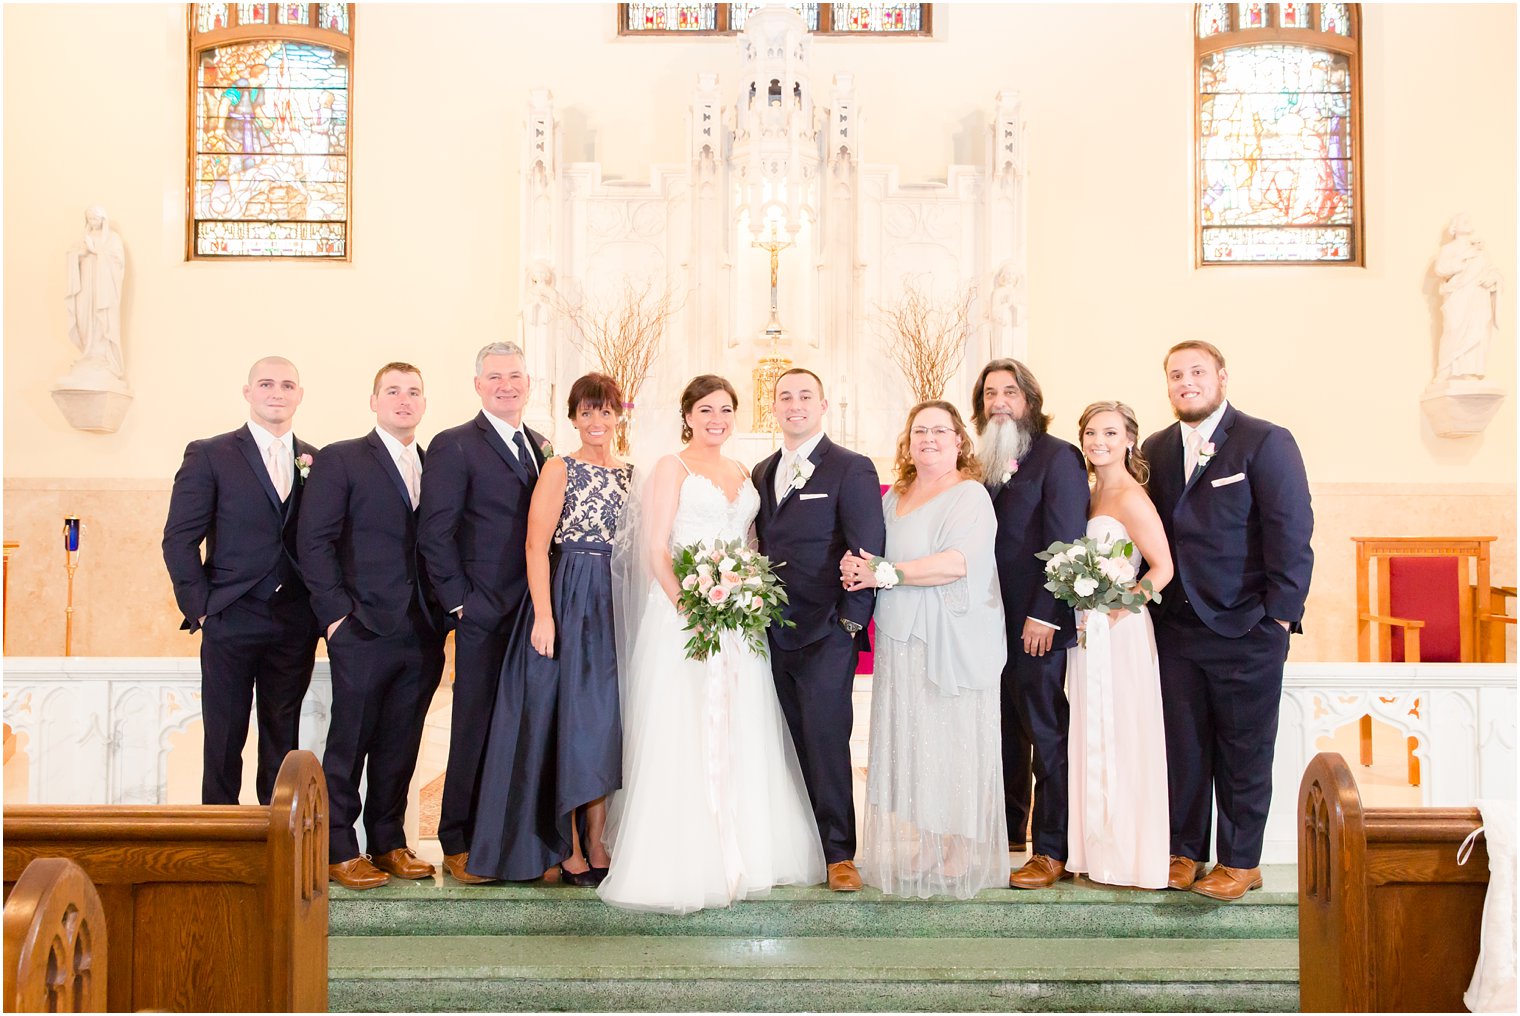 Traditional family portrait at St. Rose in Belmar NJ